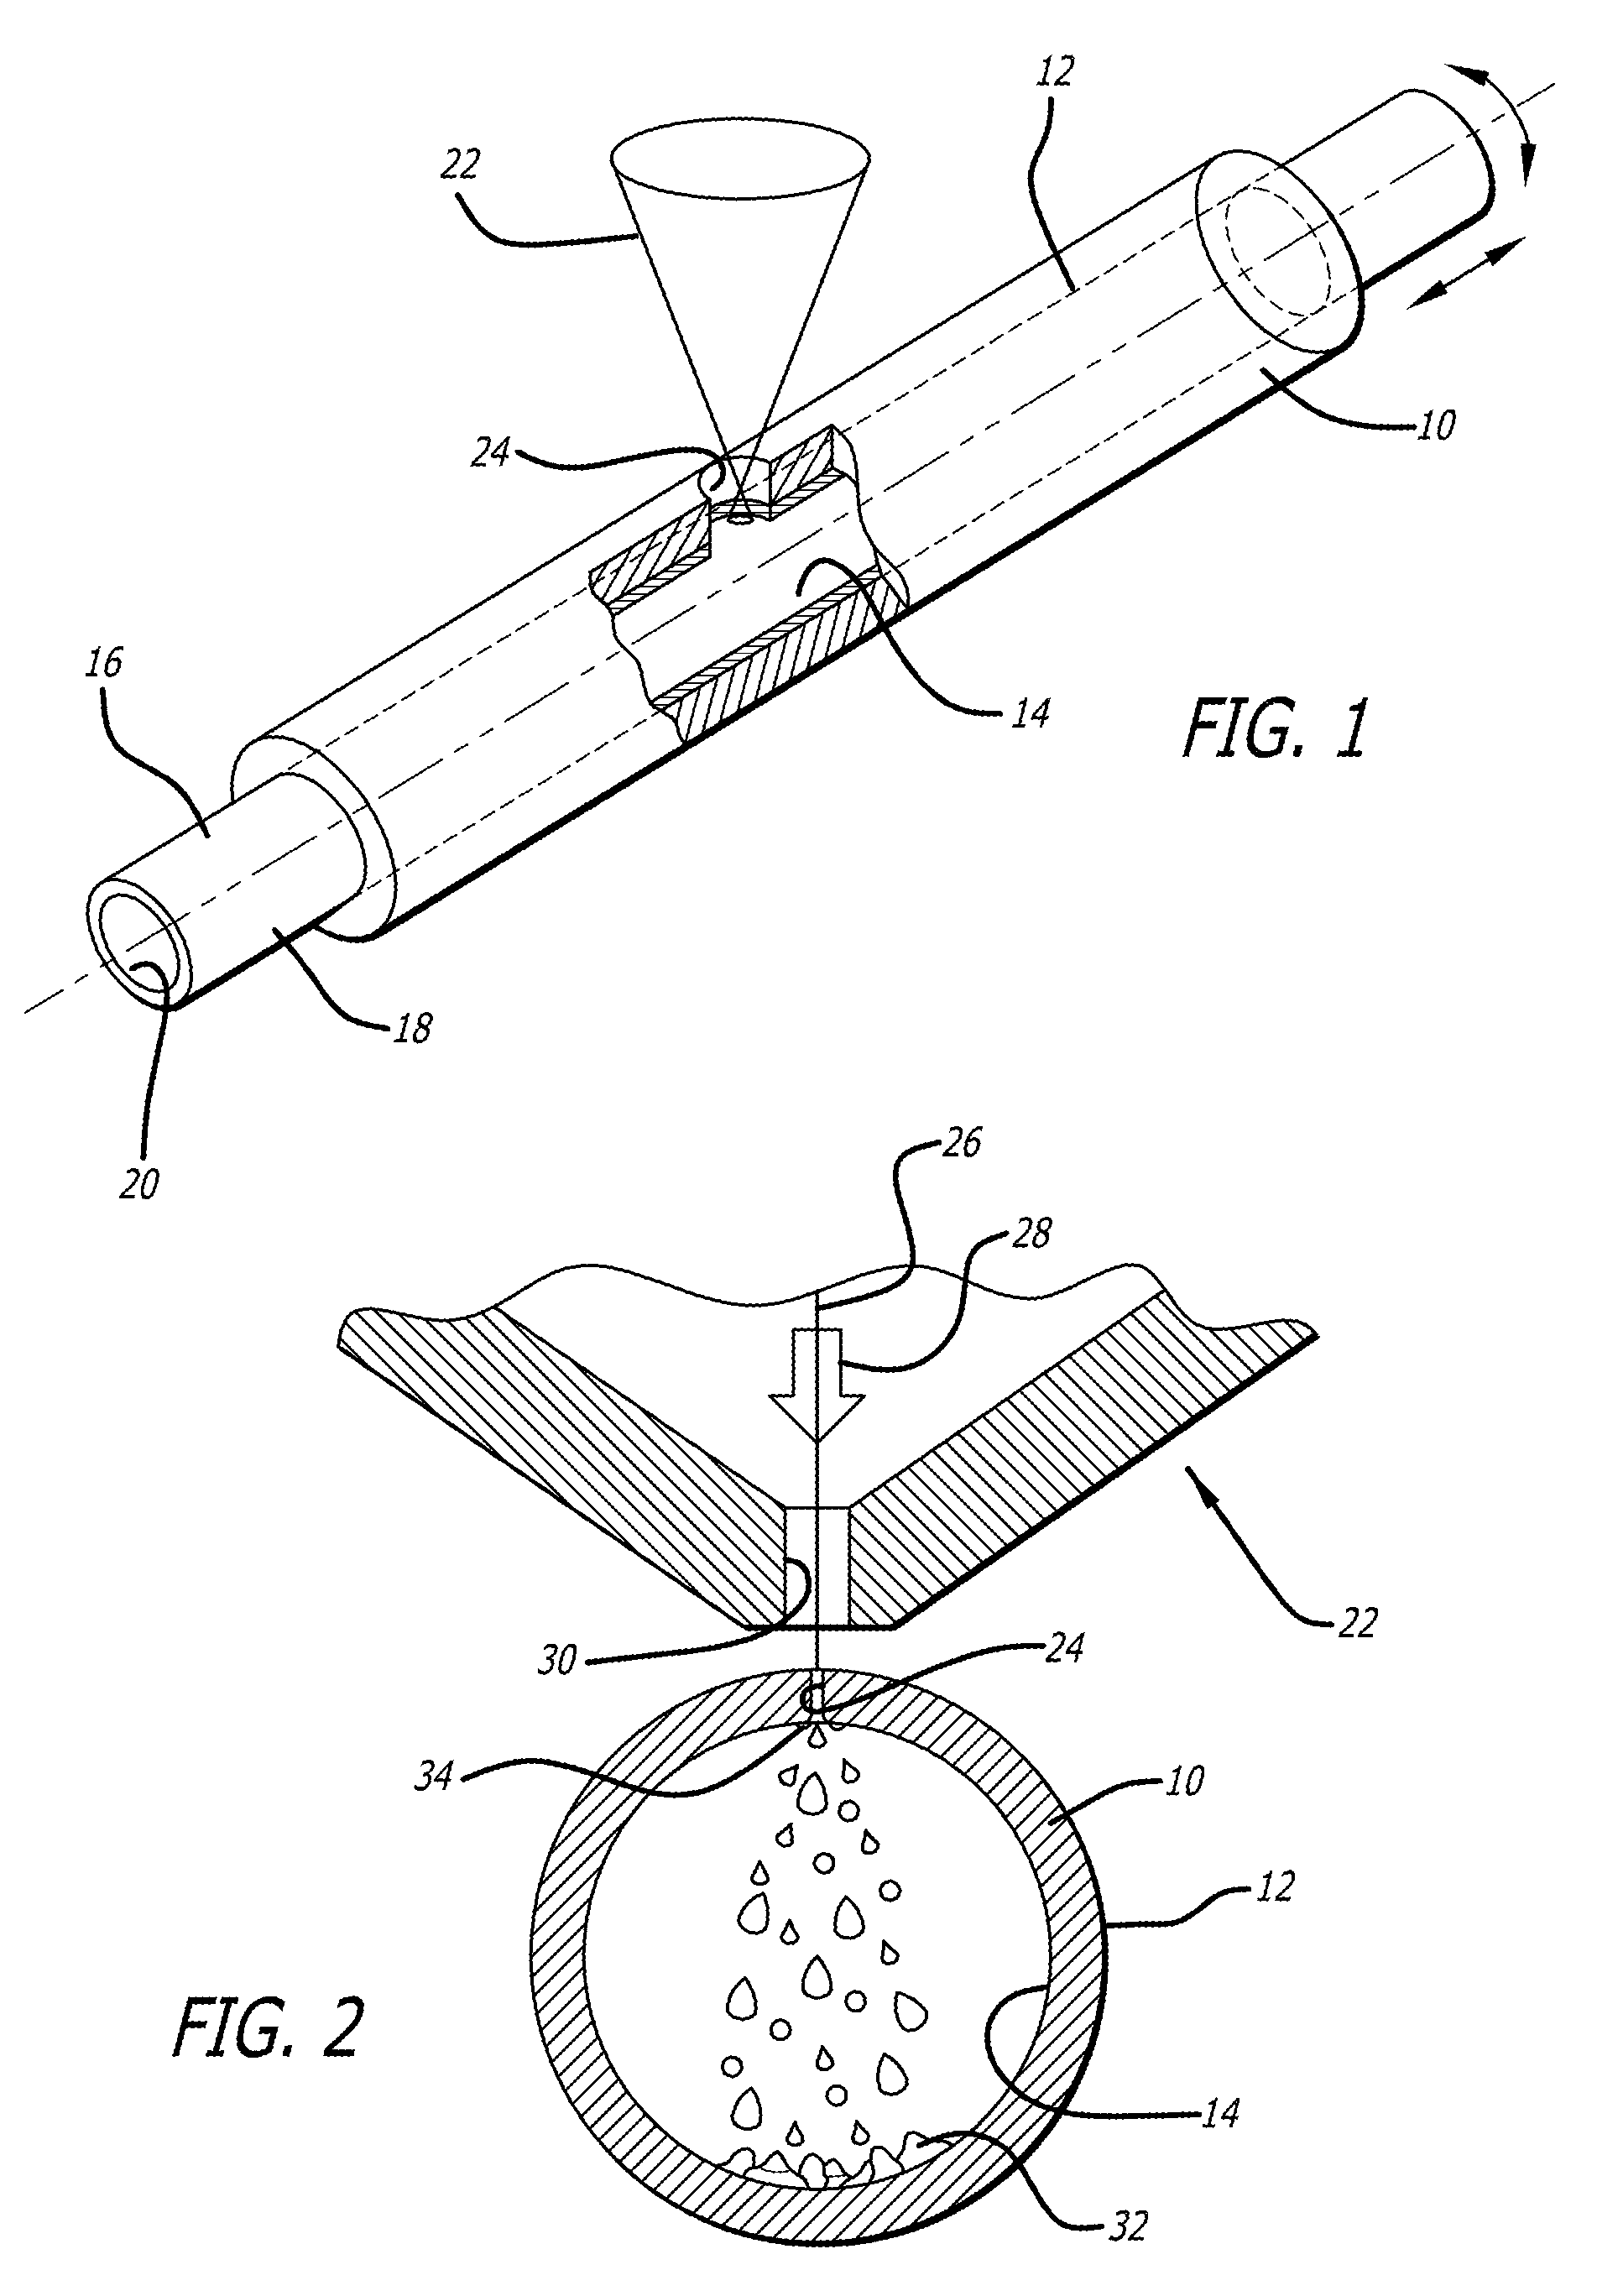 Methods and systems for laser cutting and processing tubing to make medical devices